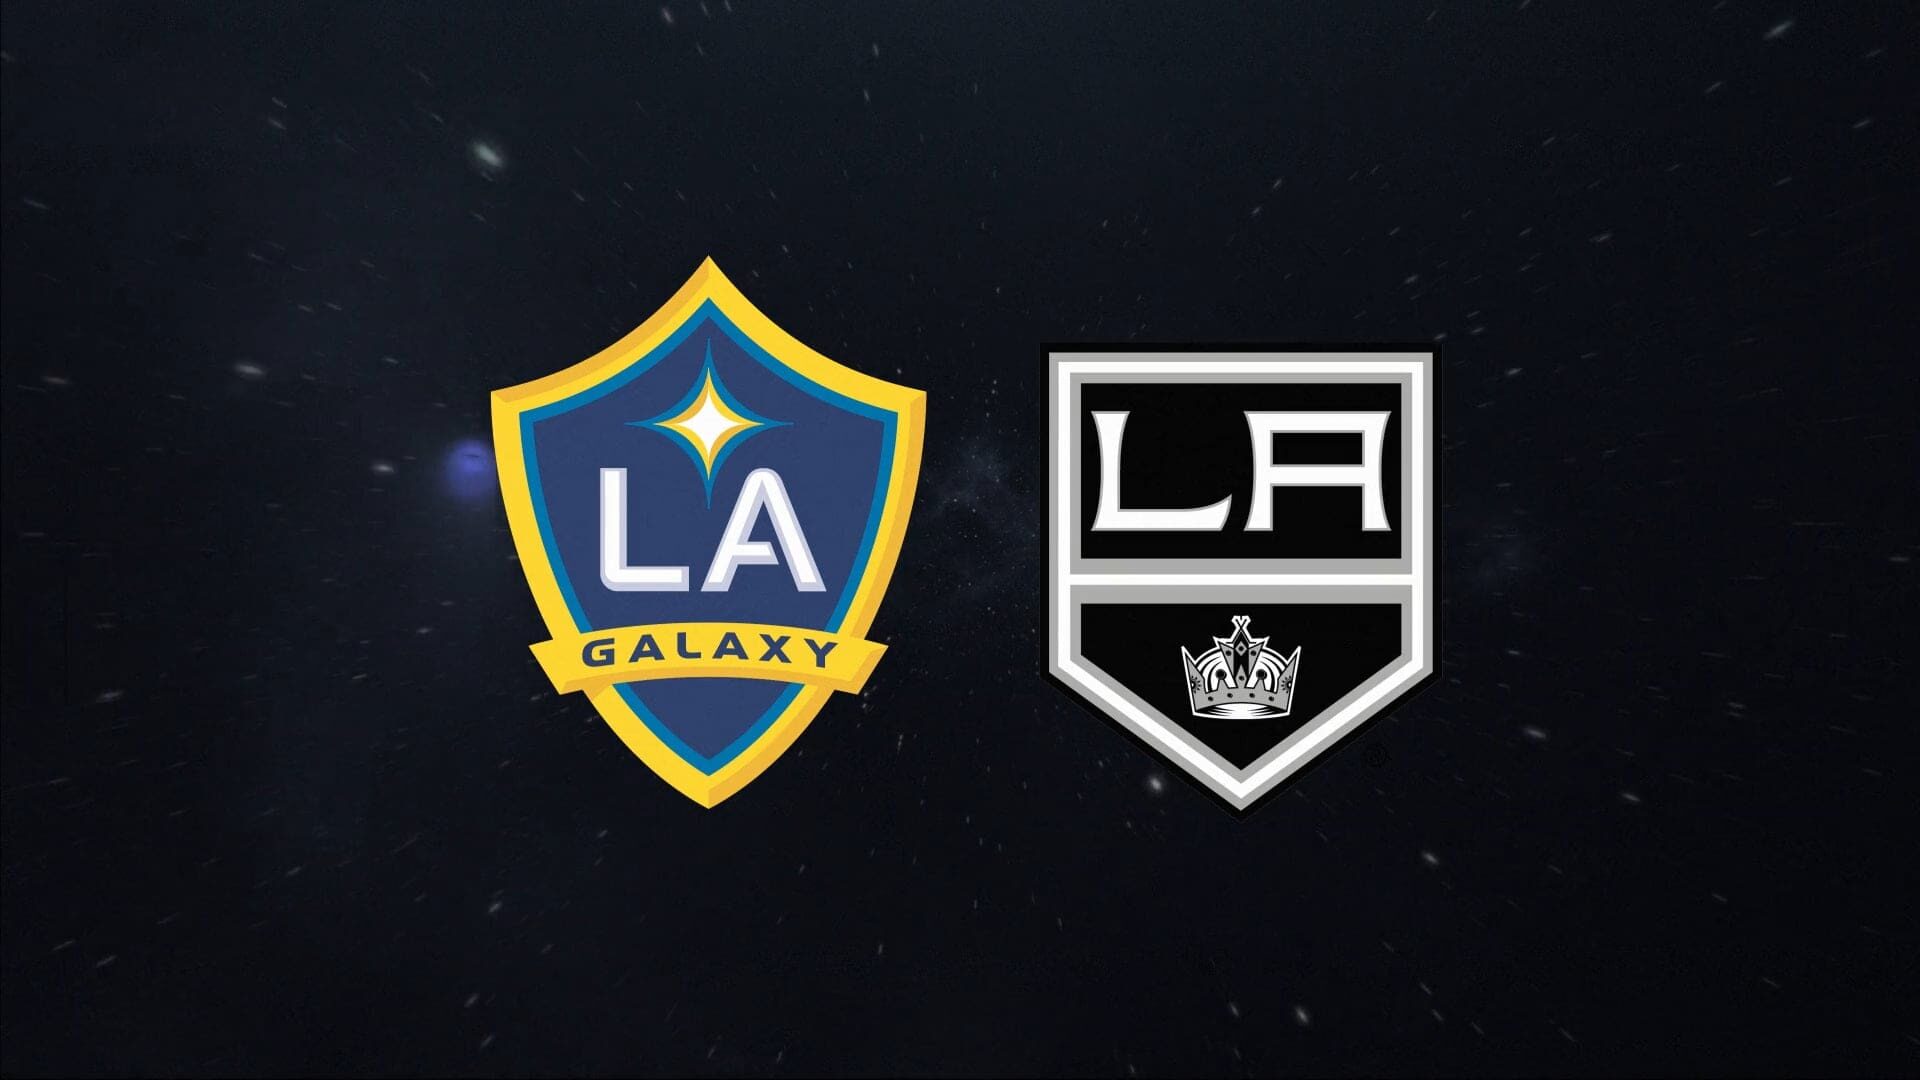 The emblems of LA Galaxy and LA Kings side by side, symbolizing the united spirit of LA's premier sports teams.